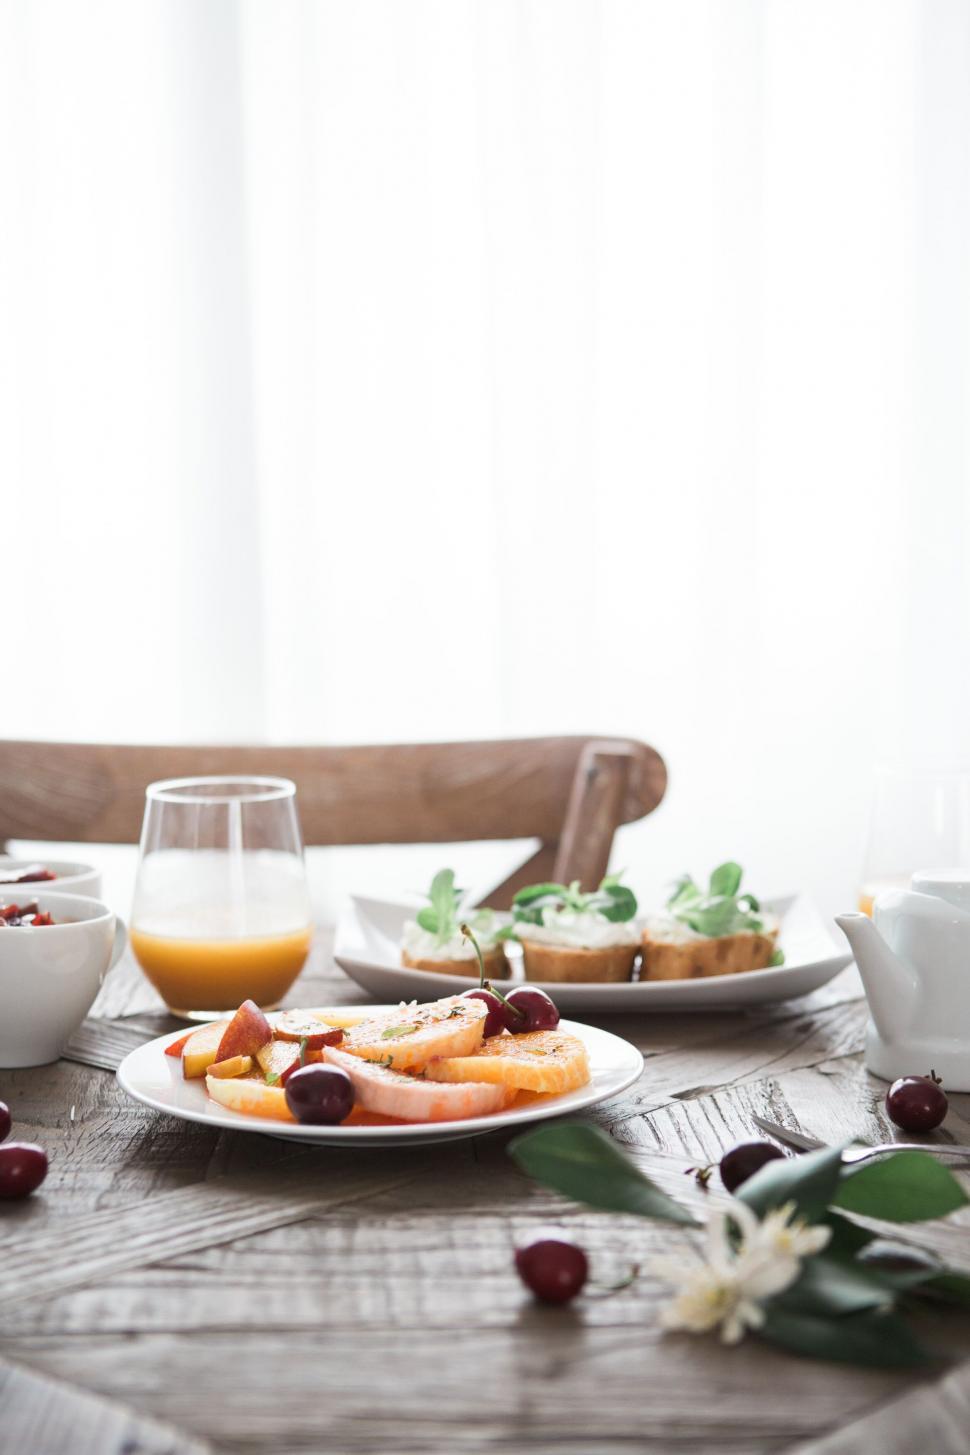 Free Image of Breakfast table with healthy food options 